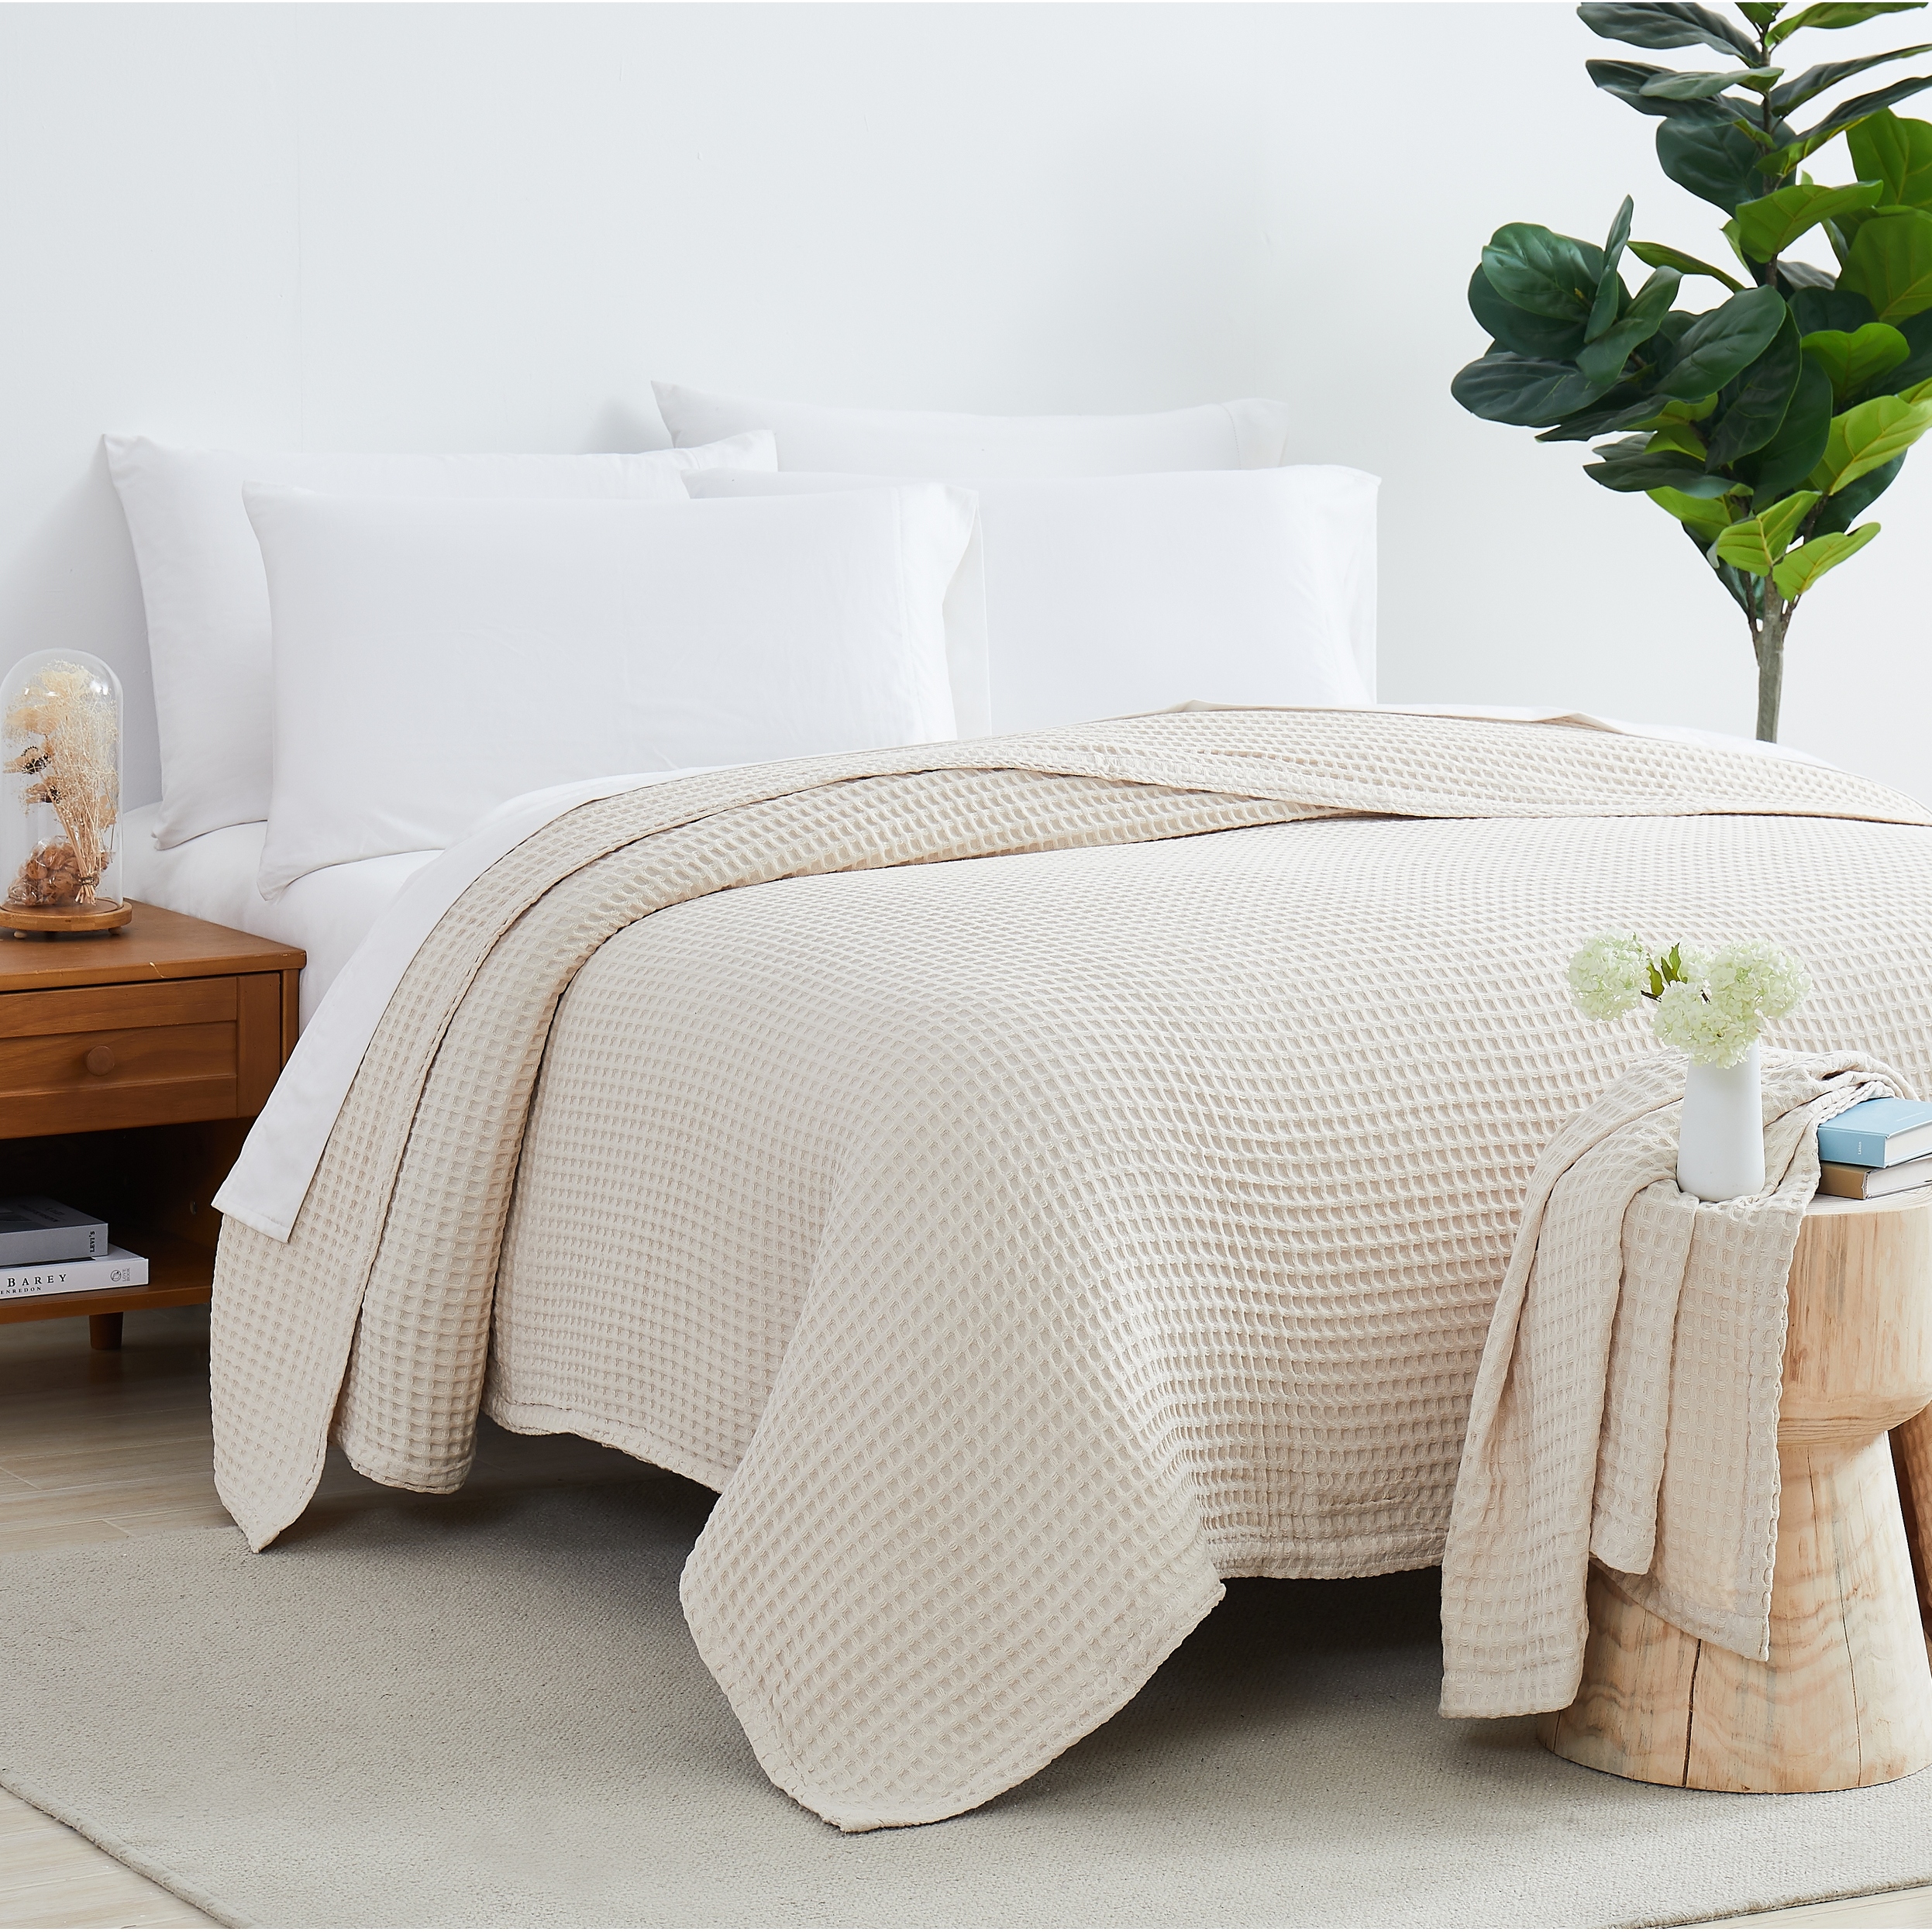 100% Cotton Waffle Weave Blanket - On Sale - Bed Bath & Beyond